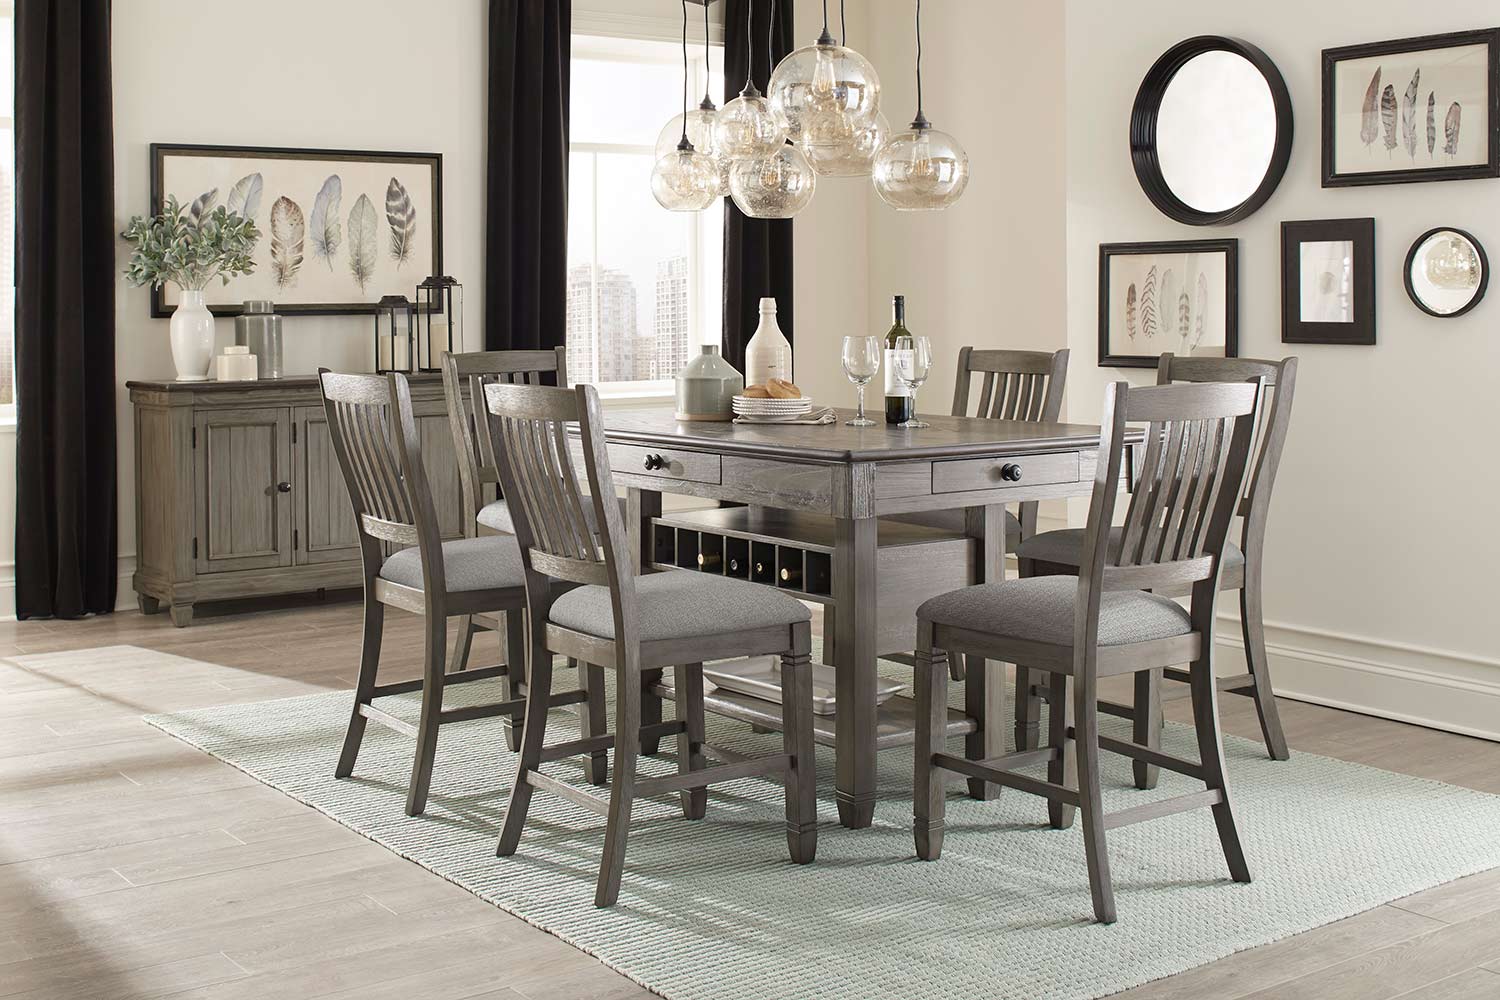 Homelegance Granby Counter Height Dining Set - Antique Gray and Coffee